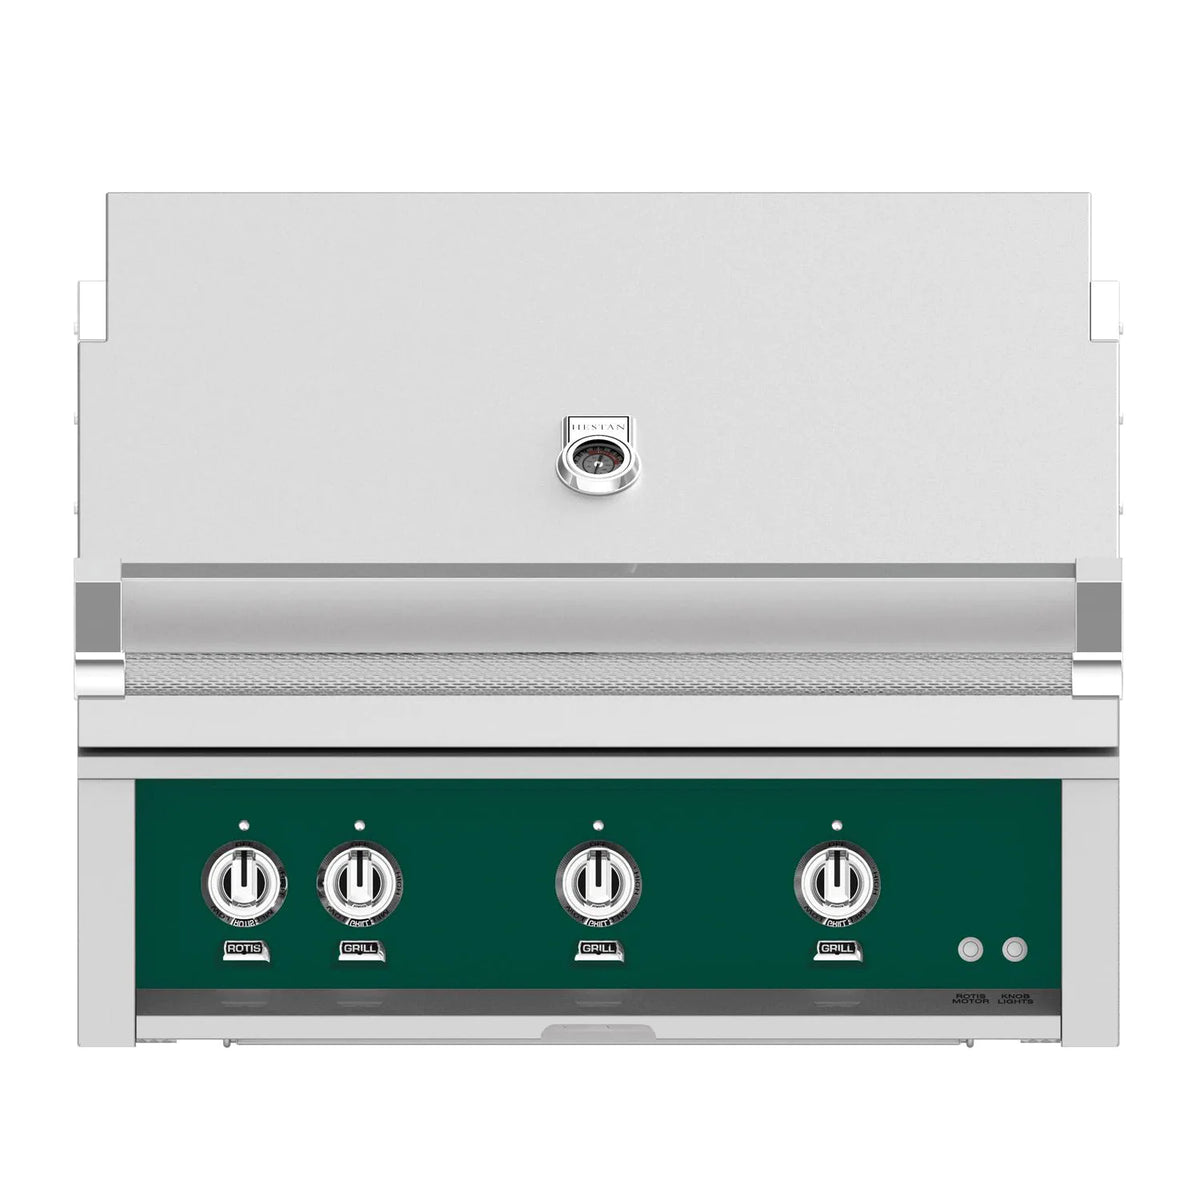 Hestan 36-Inch Built-In Gas Grill with All Infrared Burners and Rotisserie in green color